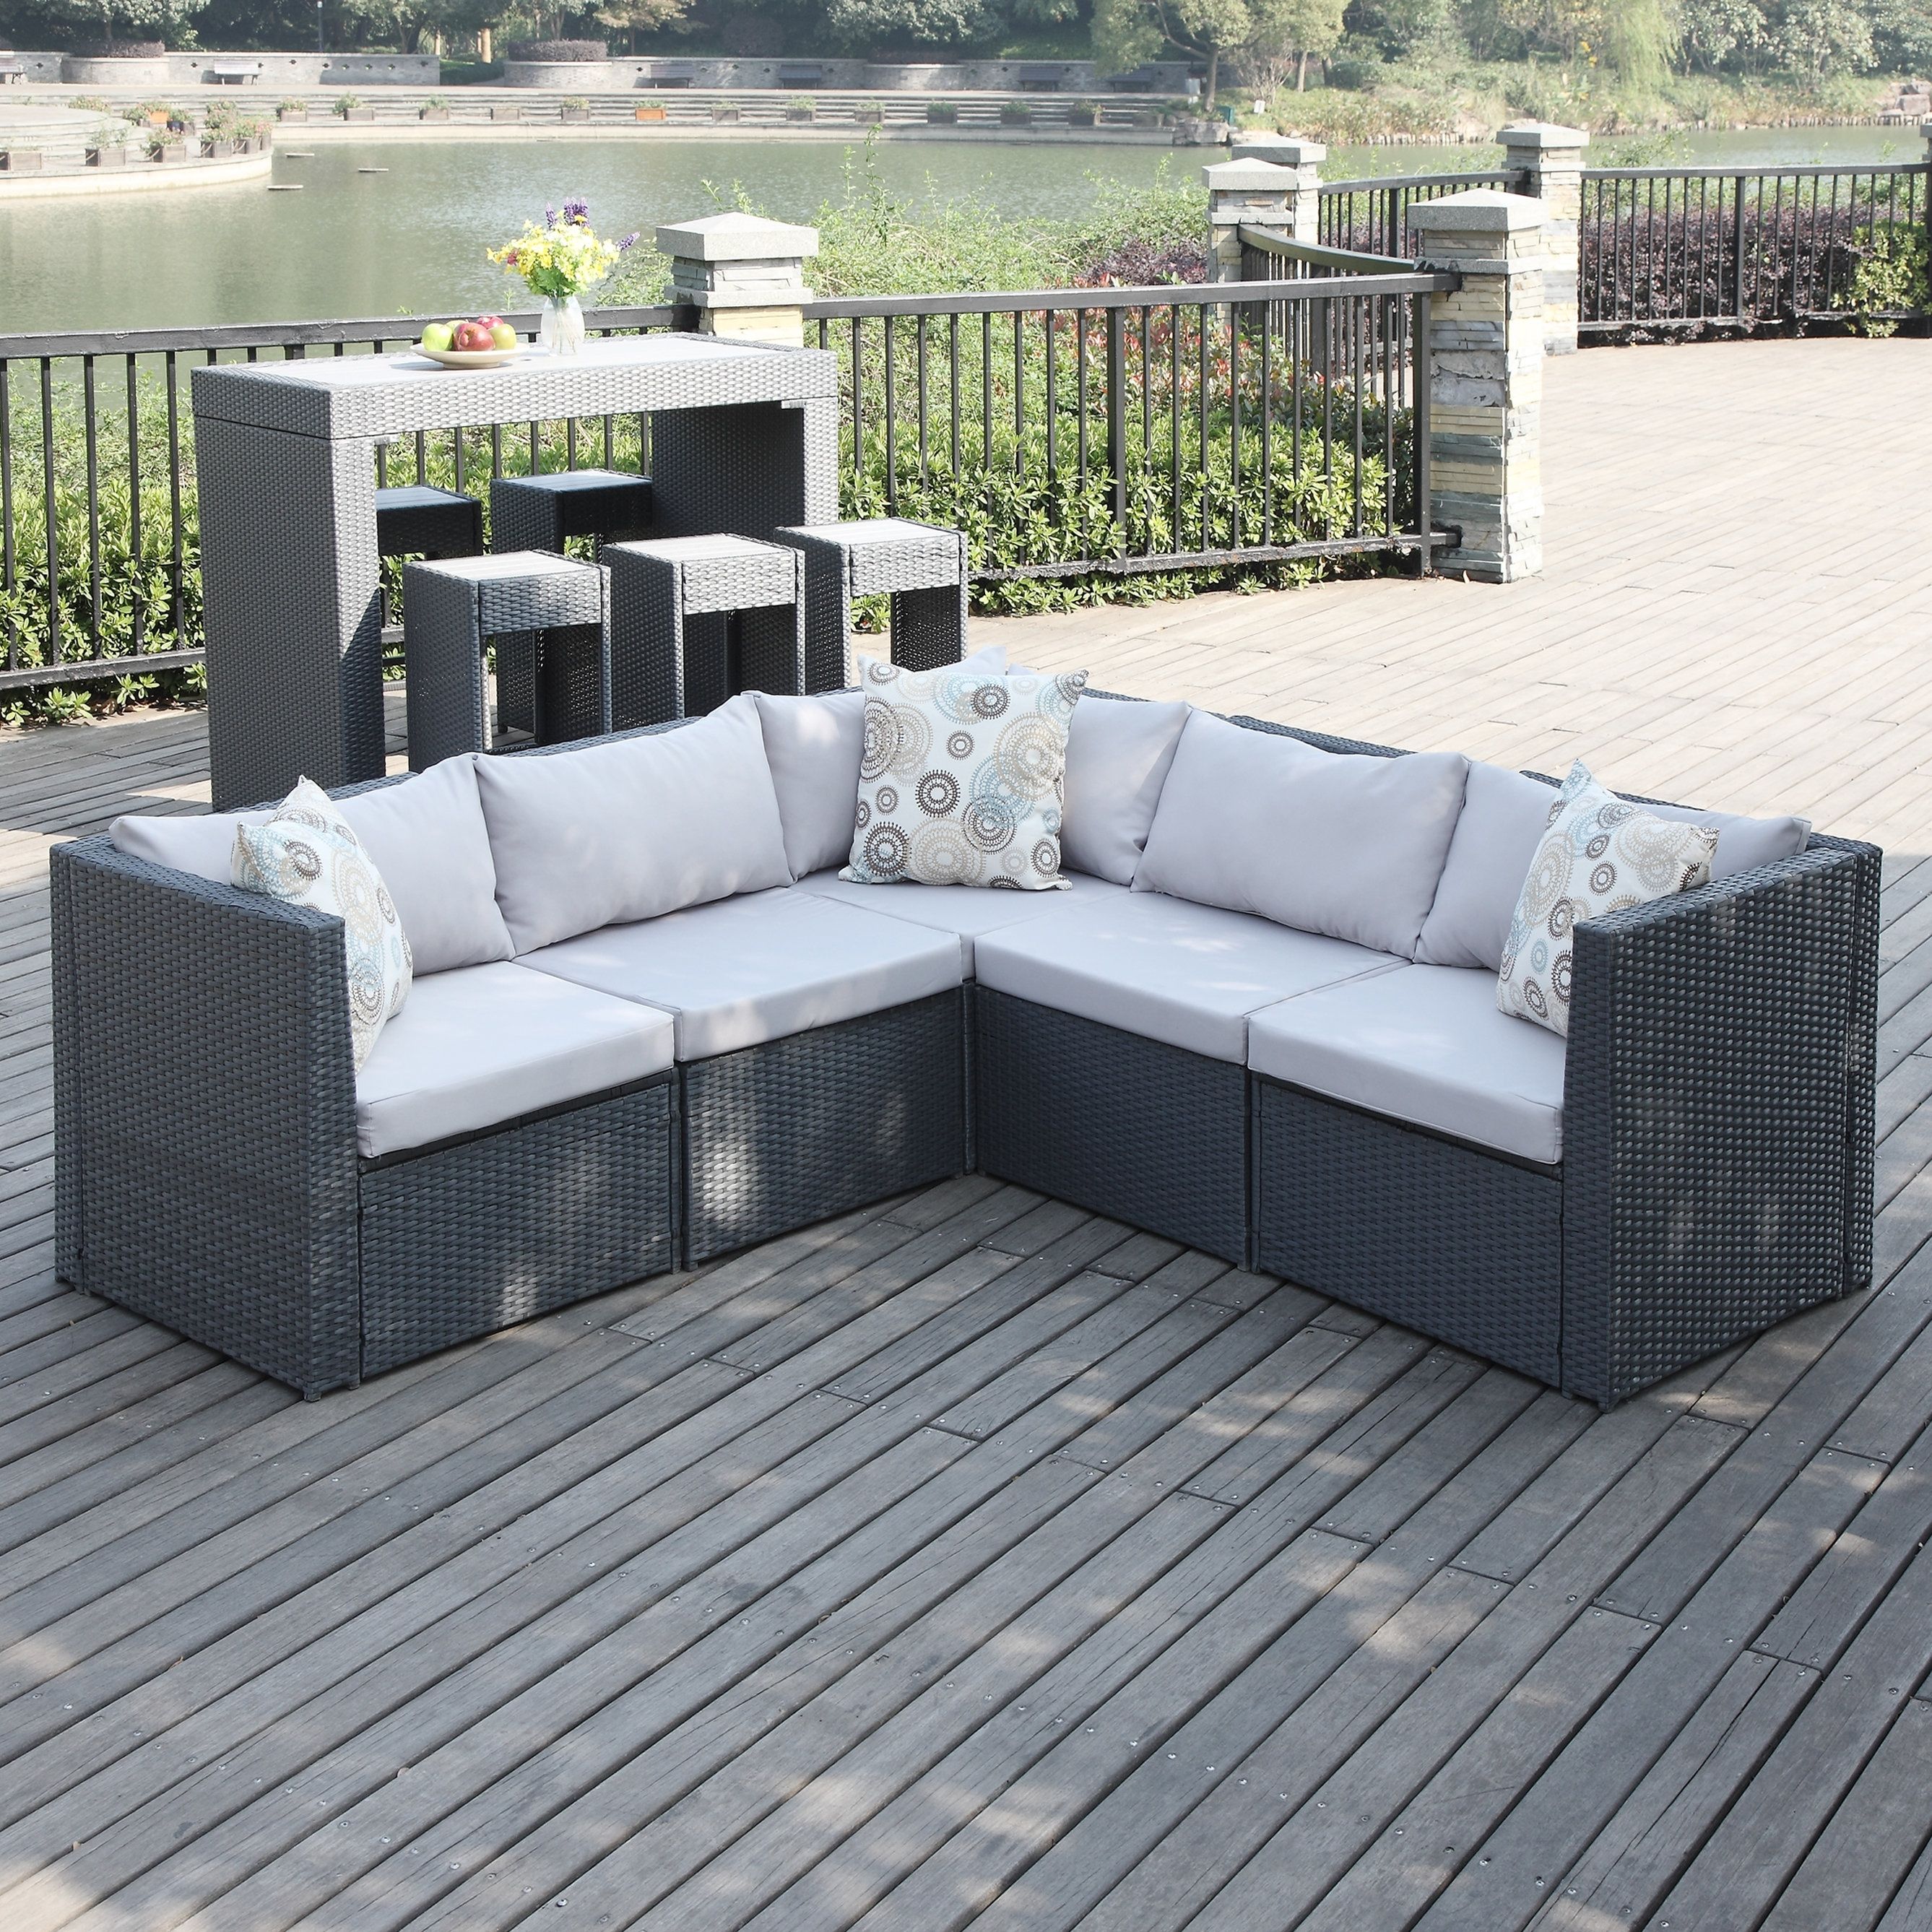 Wicker Patio Furniture You'll Love | Wayfair Within Patio Sofas (Photo 5 of 10)